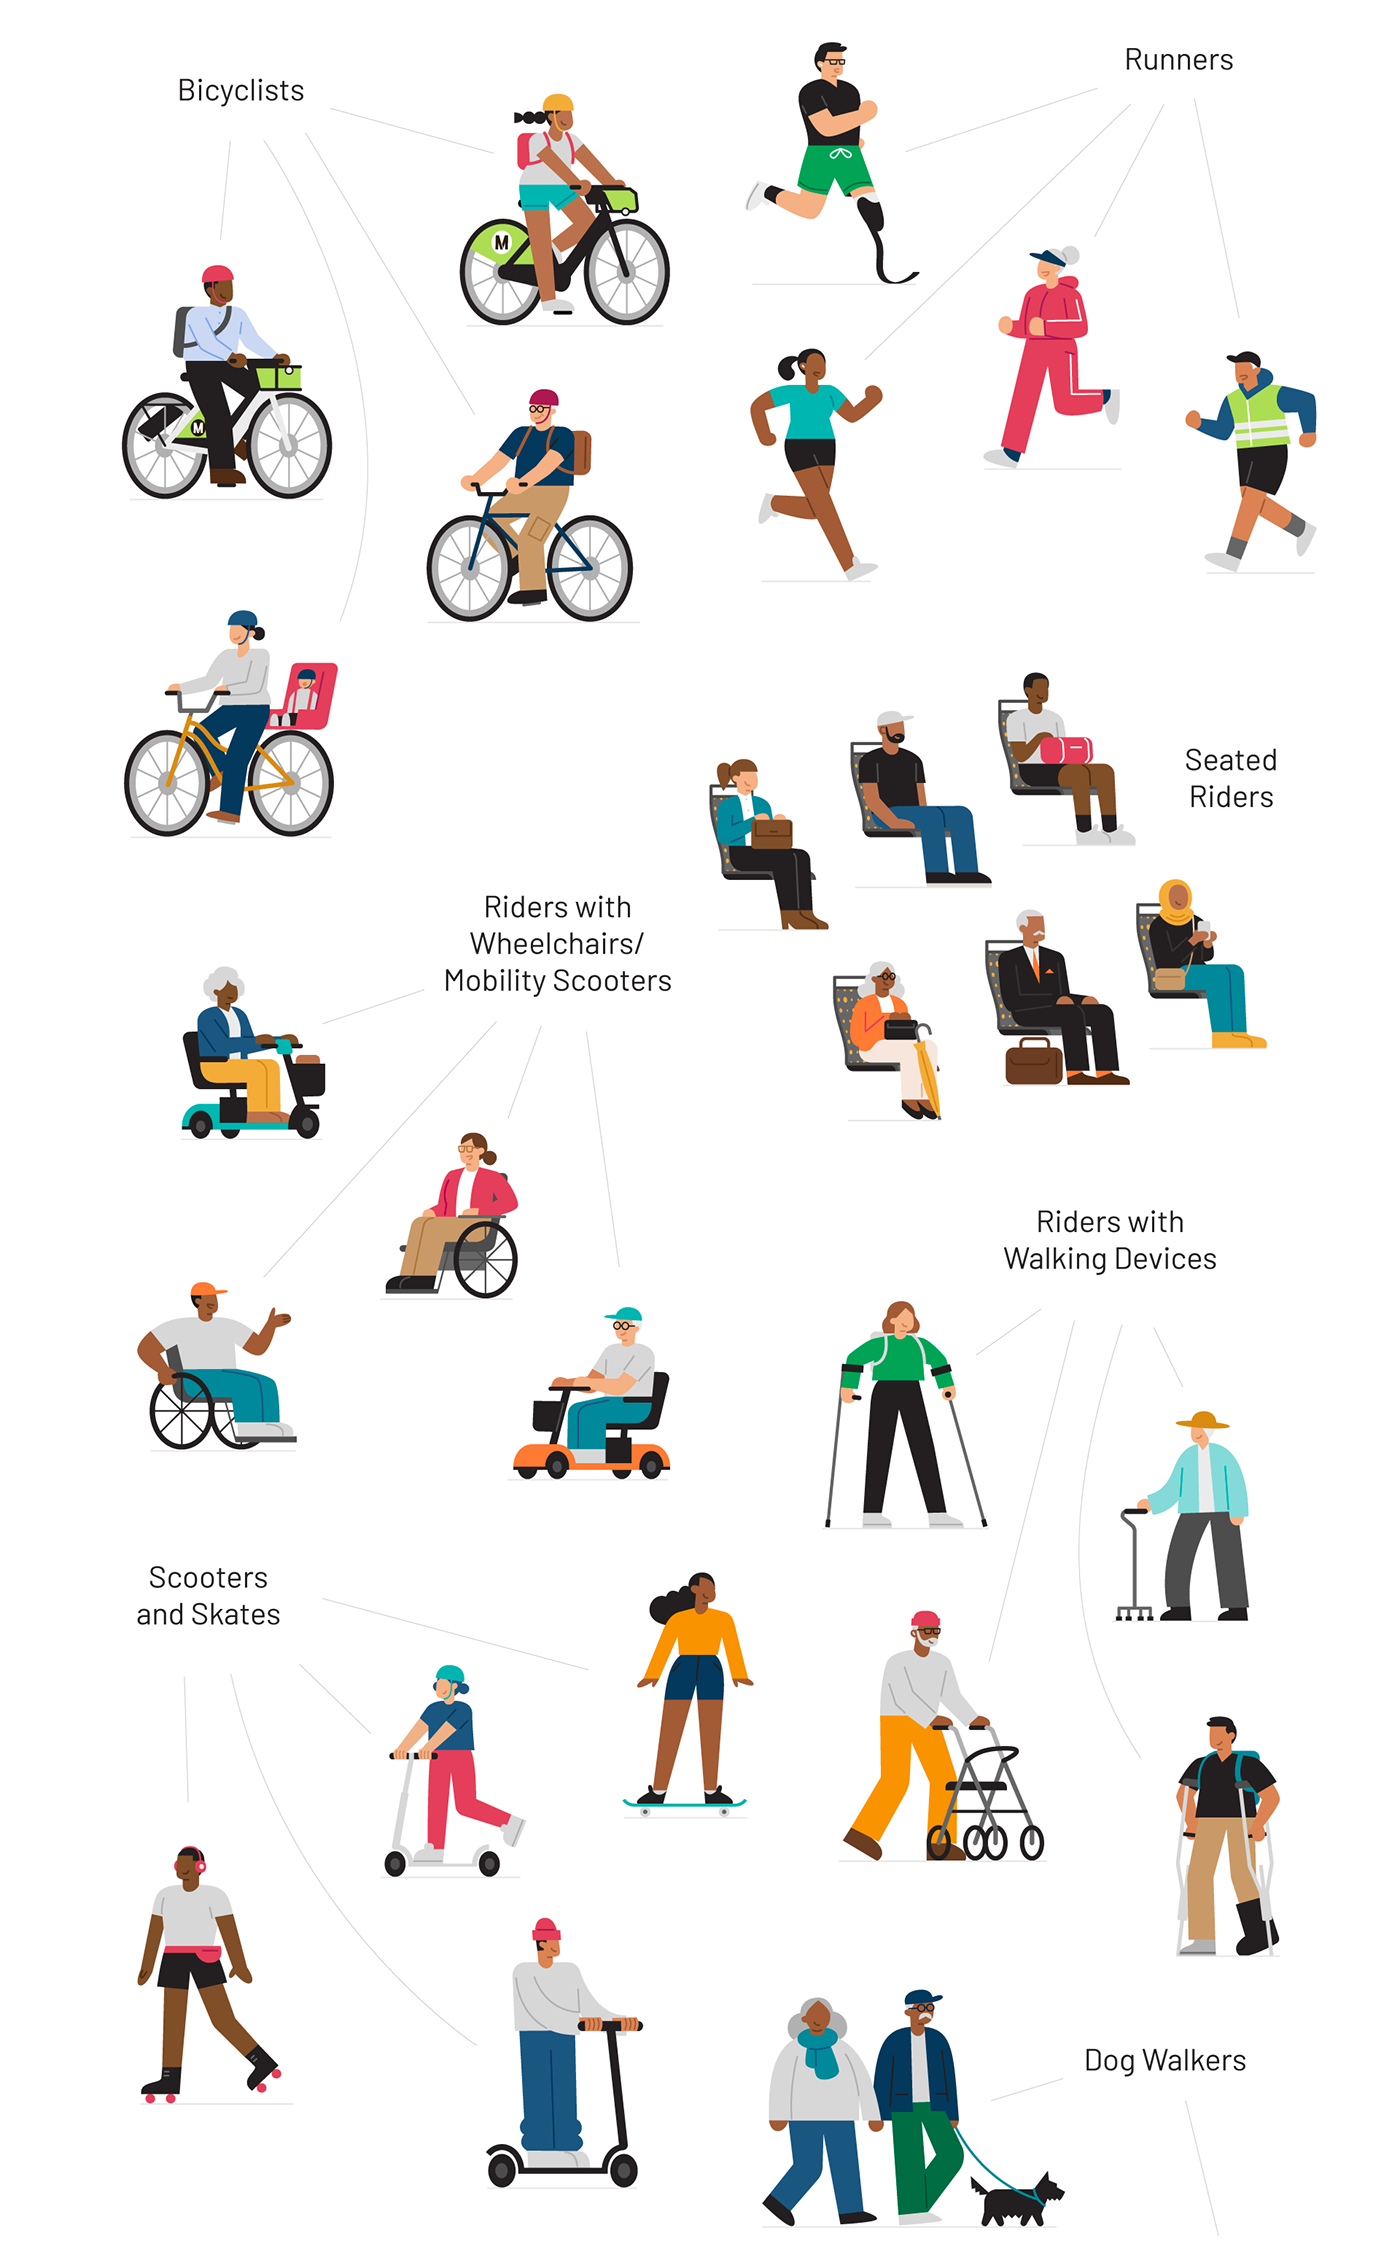 illustration of various people walking with and without mobility devices, running, and on bikes